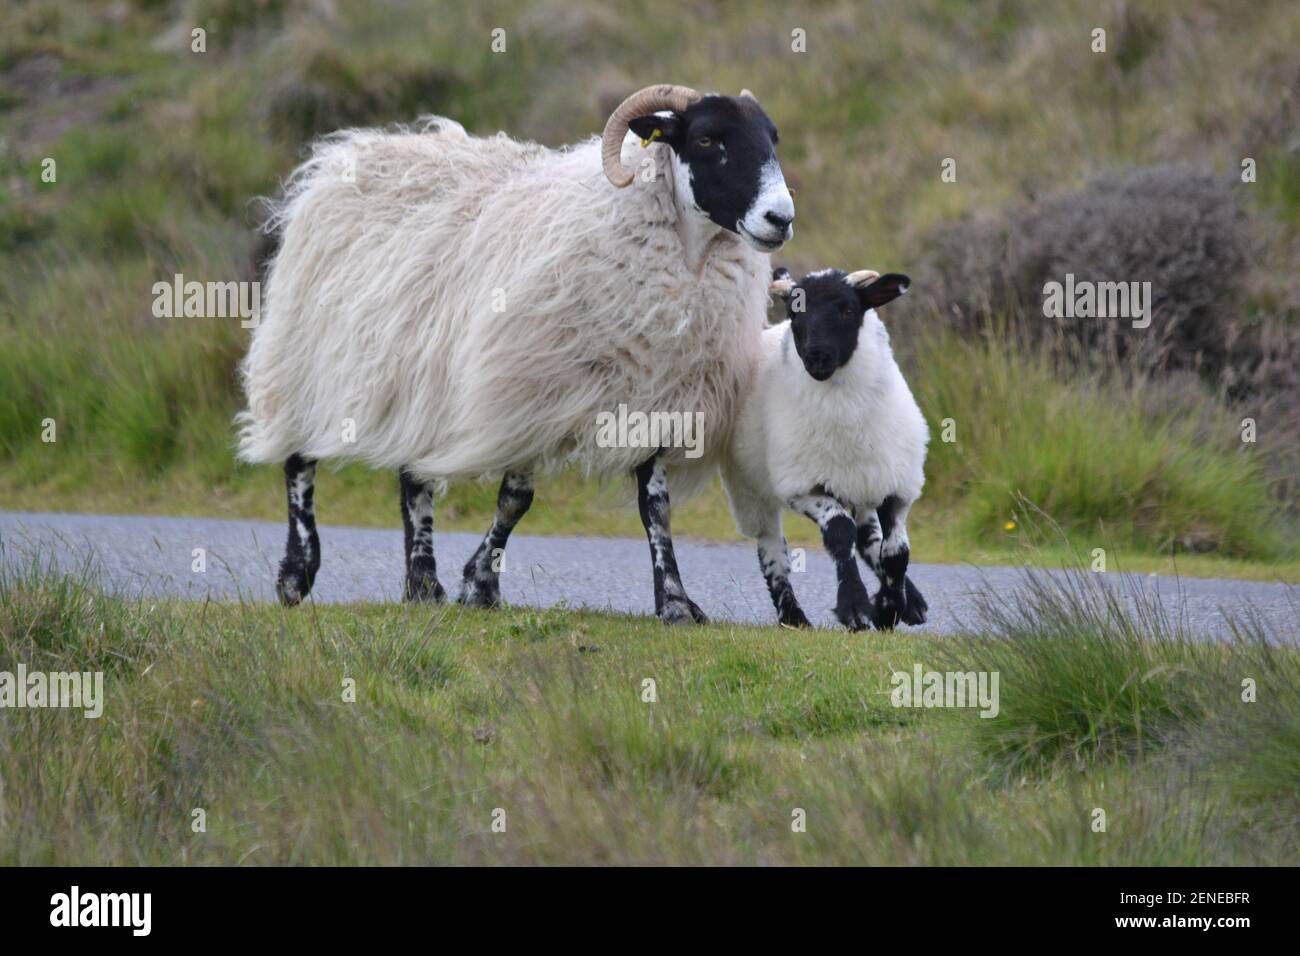 Wild Sheep And Lamb On North Yorkshire Moors - Countryside - Moorland - Grass - Purple Heather - Long White Wool - Black Faces - Horns - Yorkshire UK Stock Photo